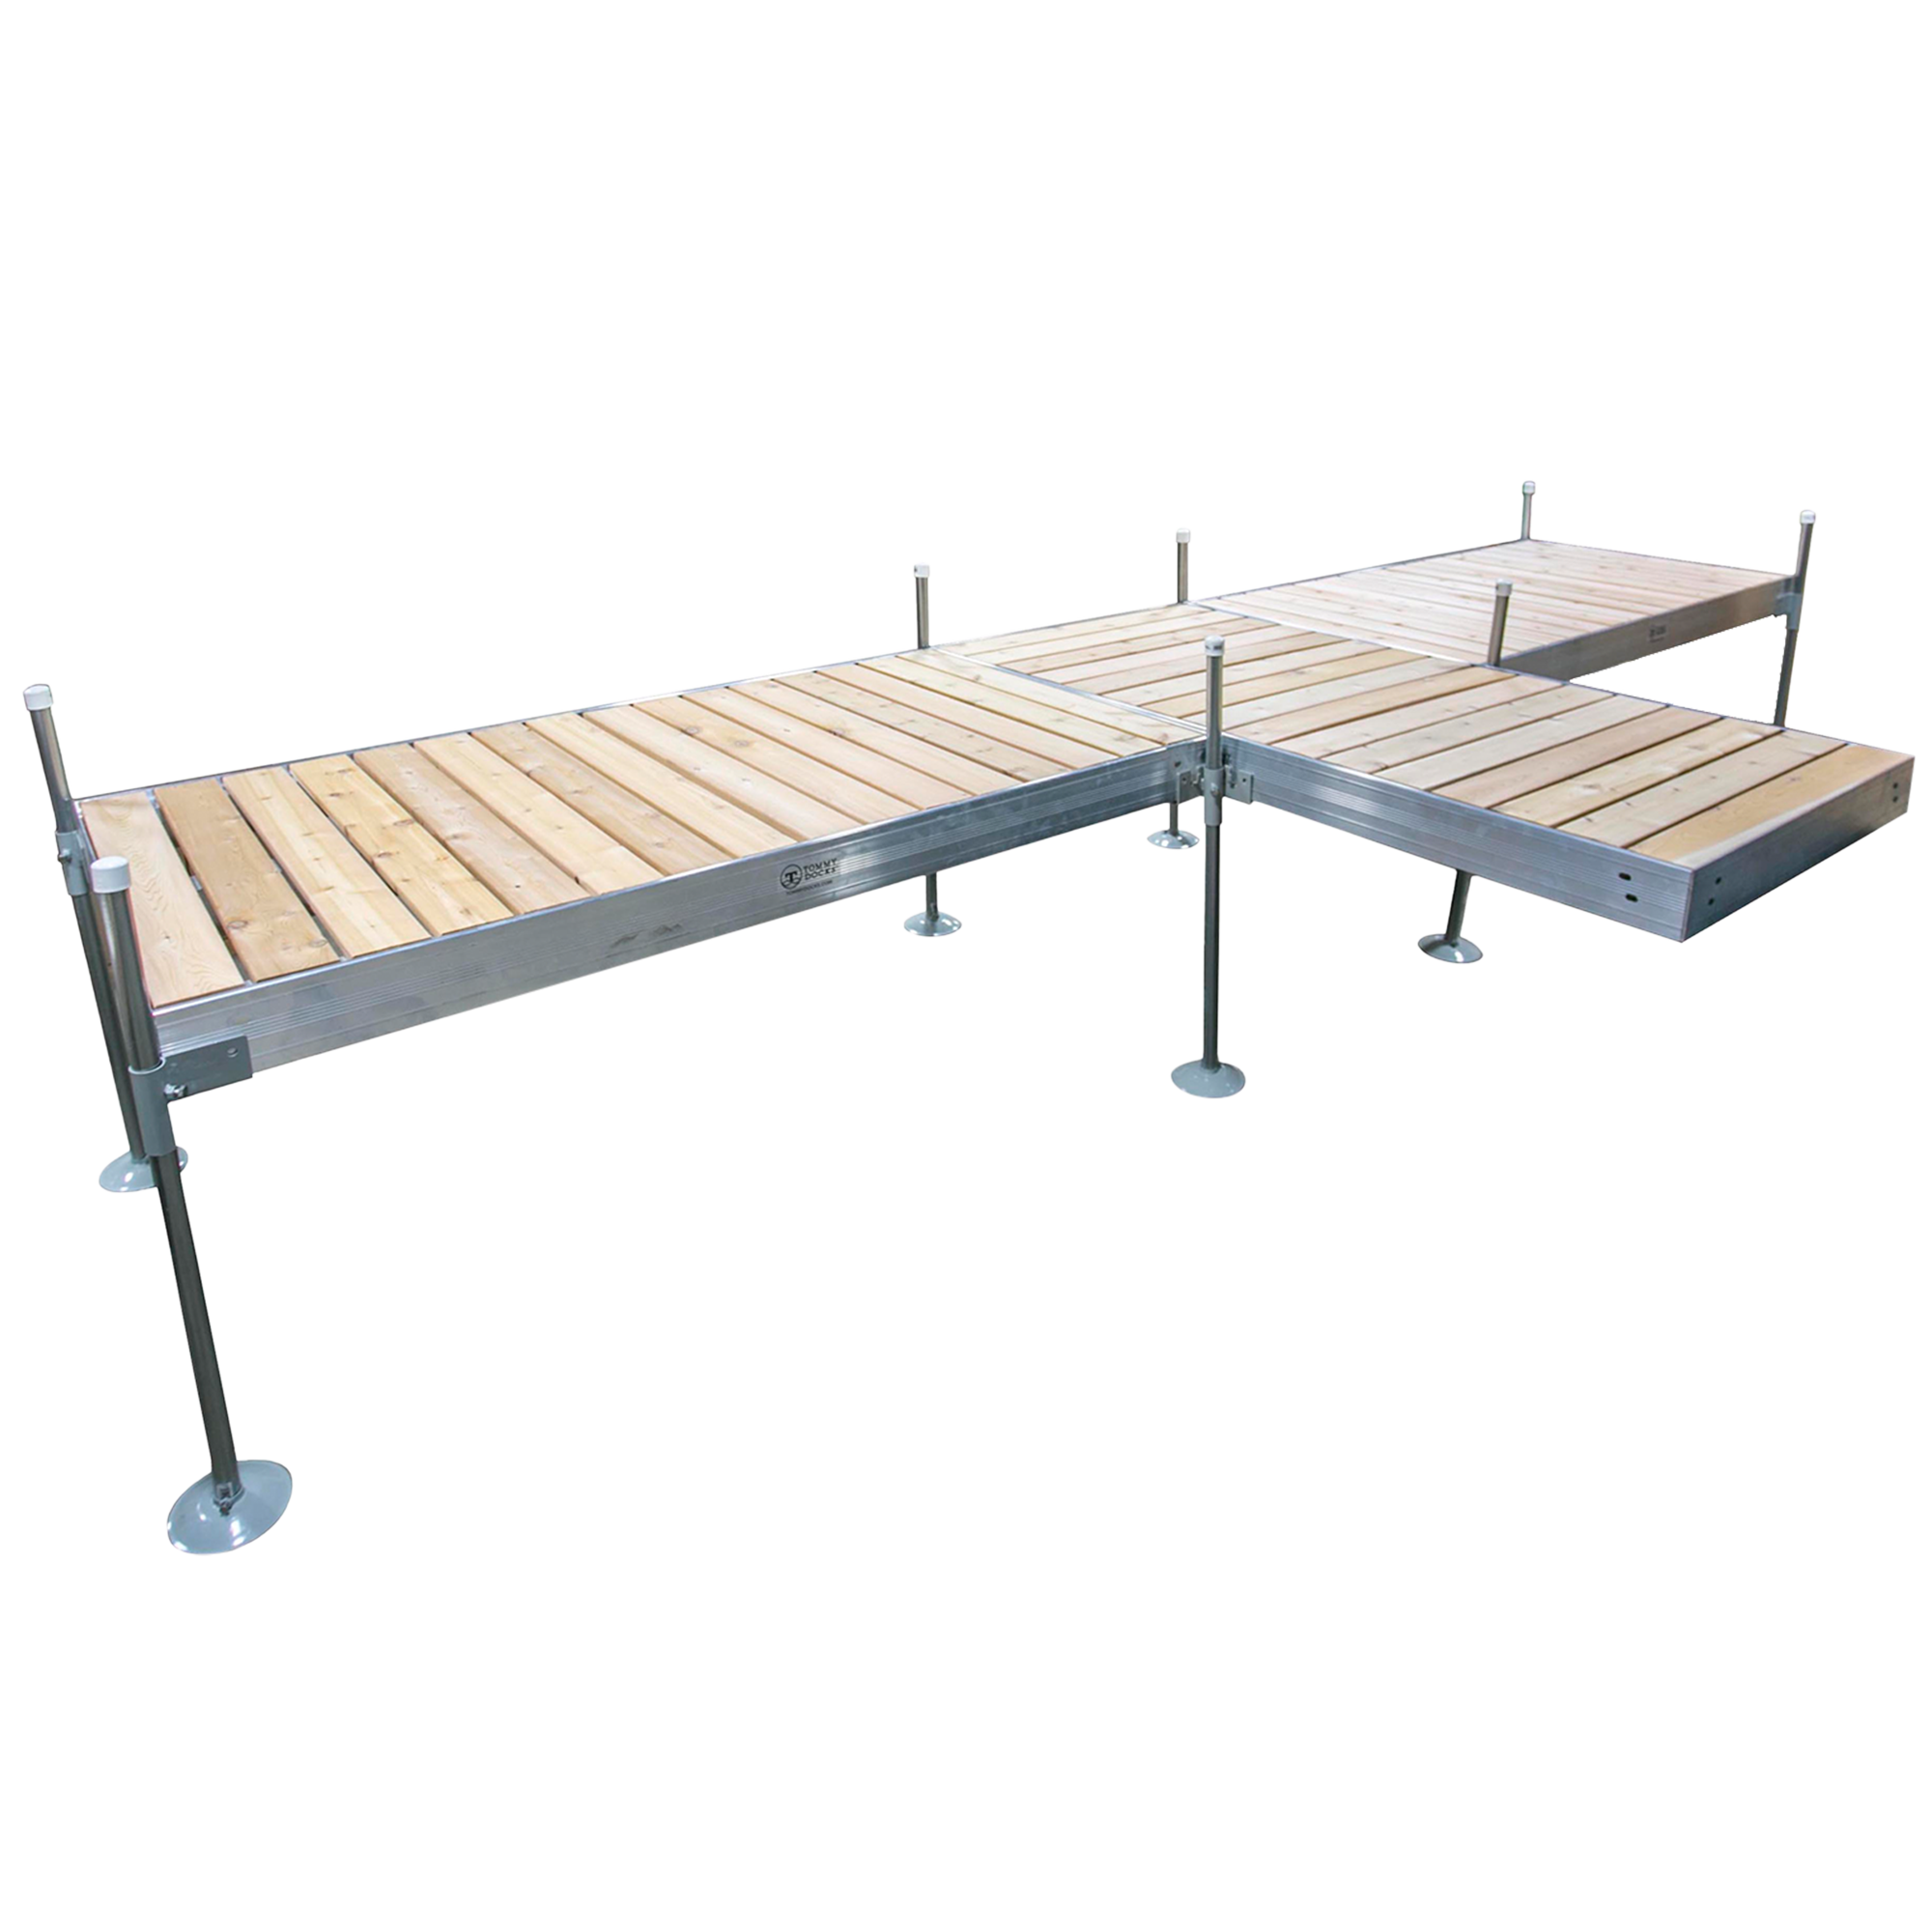 8' T-Shaped Boat Dock System with Aluminum Frame and Cedar Decking